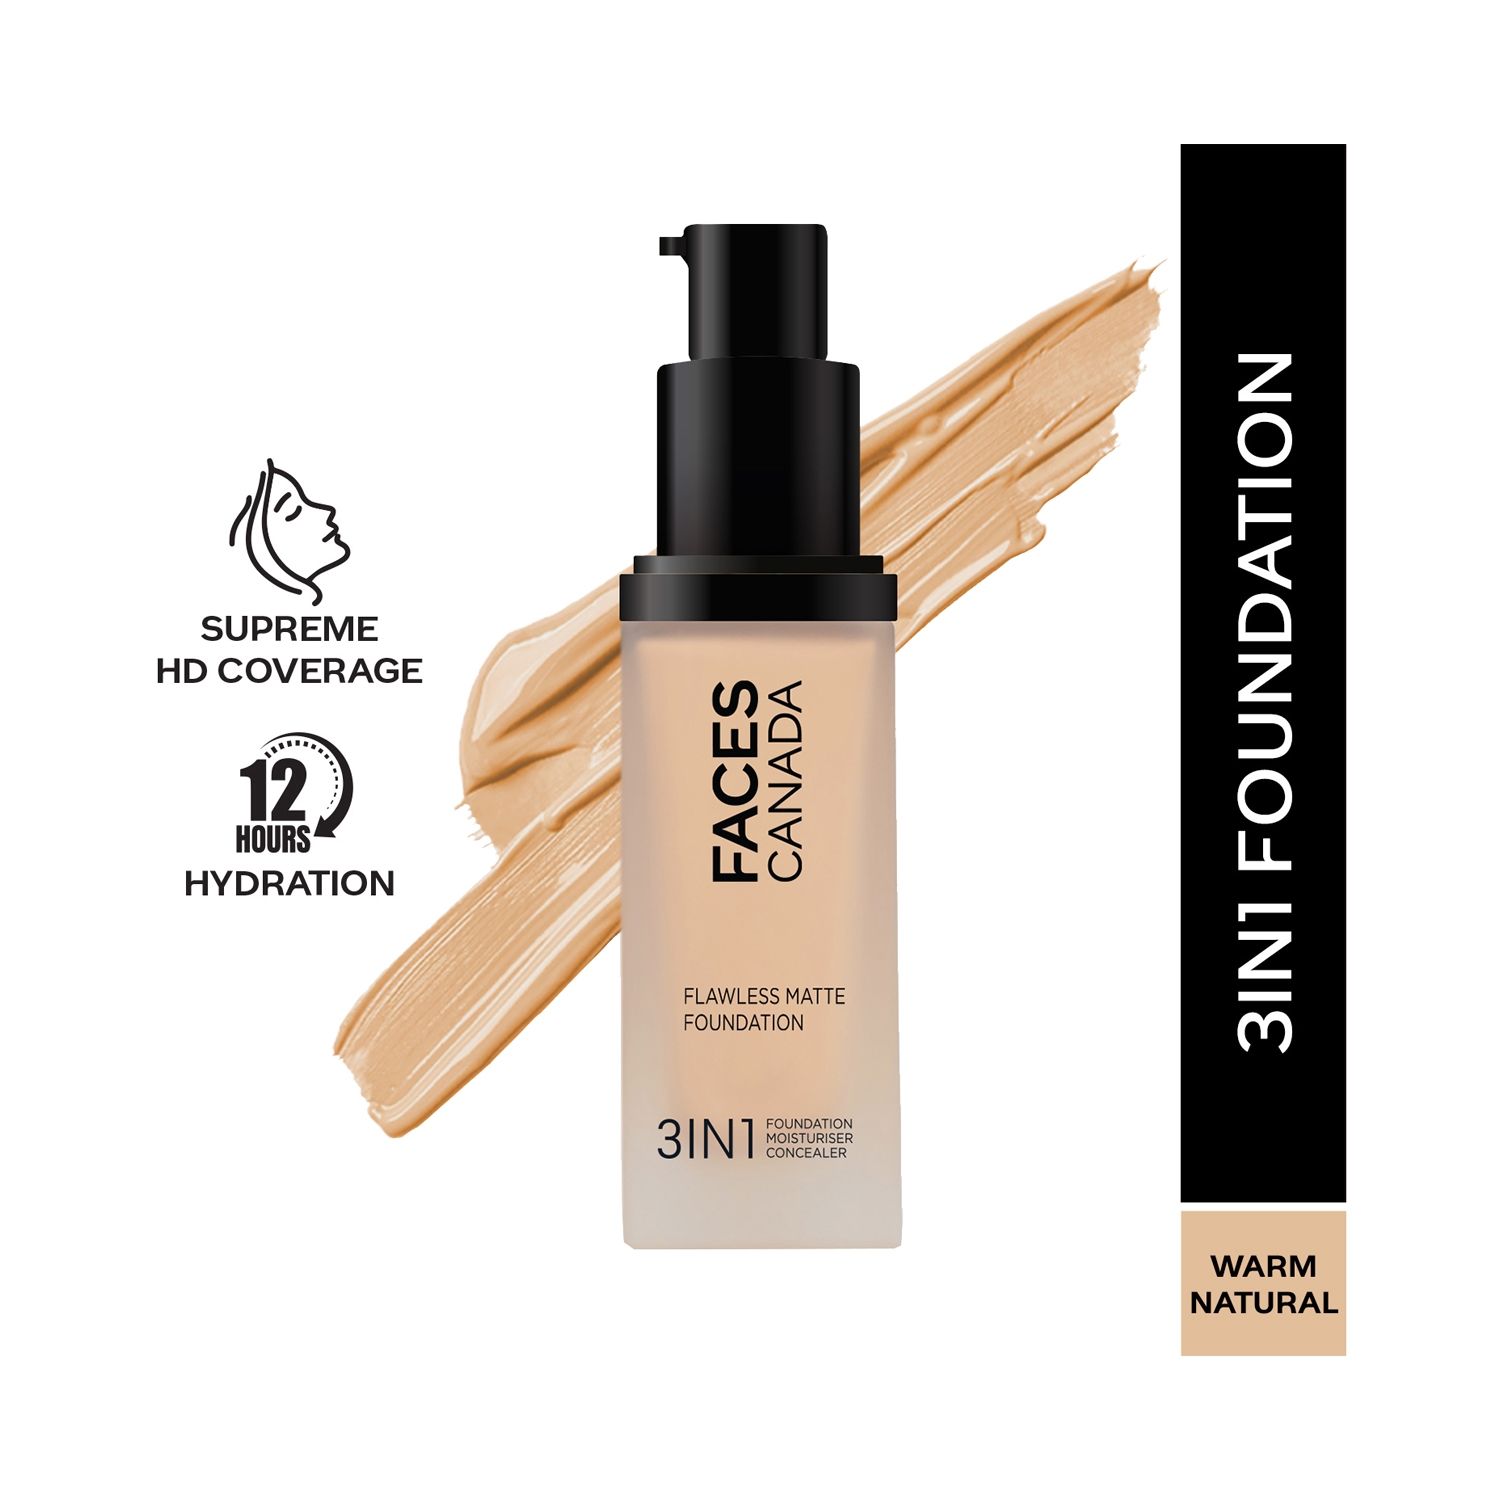 Faces Canada | Faces Canada 3-In-1 Flawless Matte Foundation SPF 18 - 021 Warm Natural (30ml)